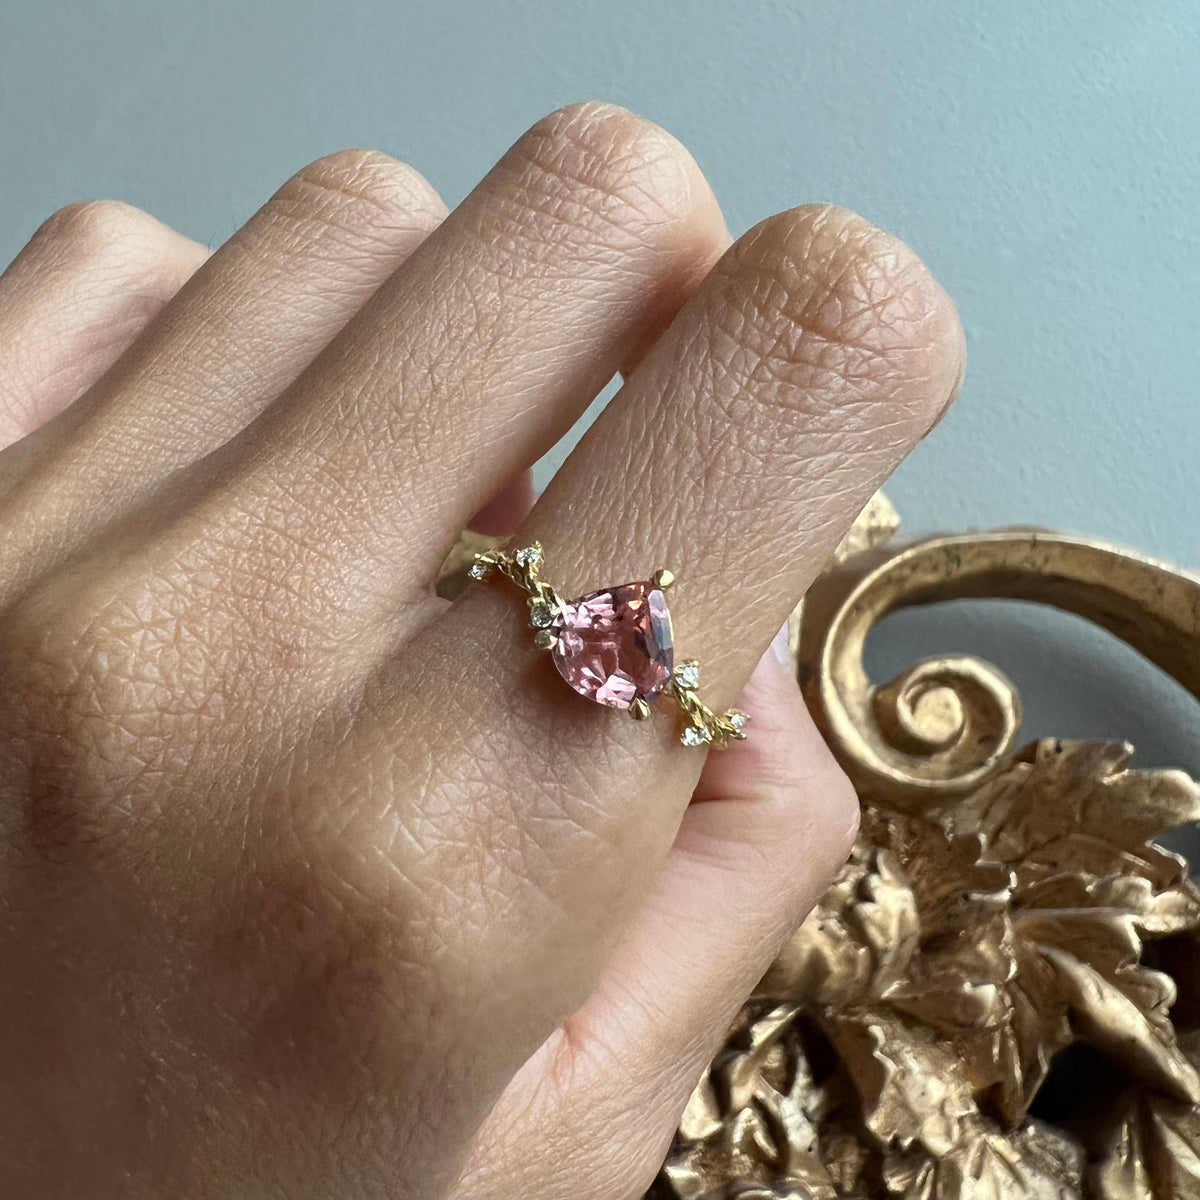 One Of A Kind: 14K Pink Tourmaline Sicily Ring - Tippy Taste Jewelry